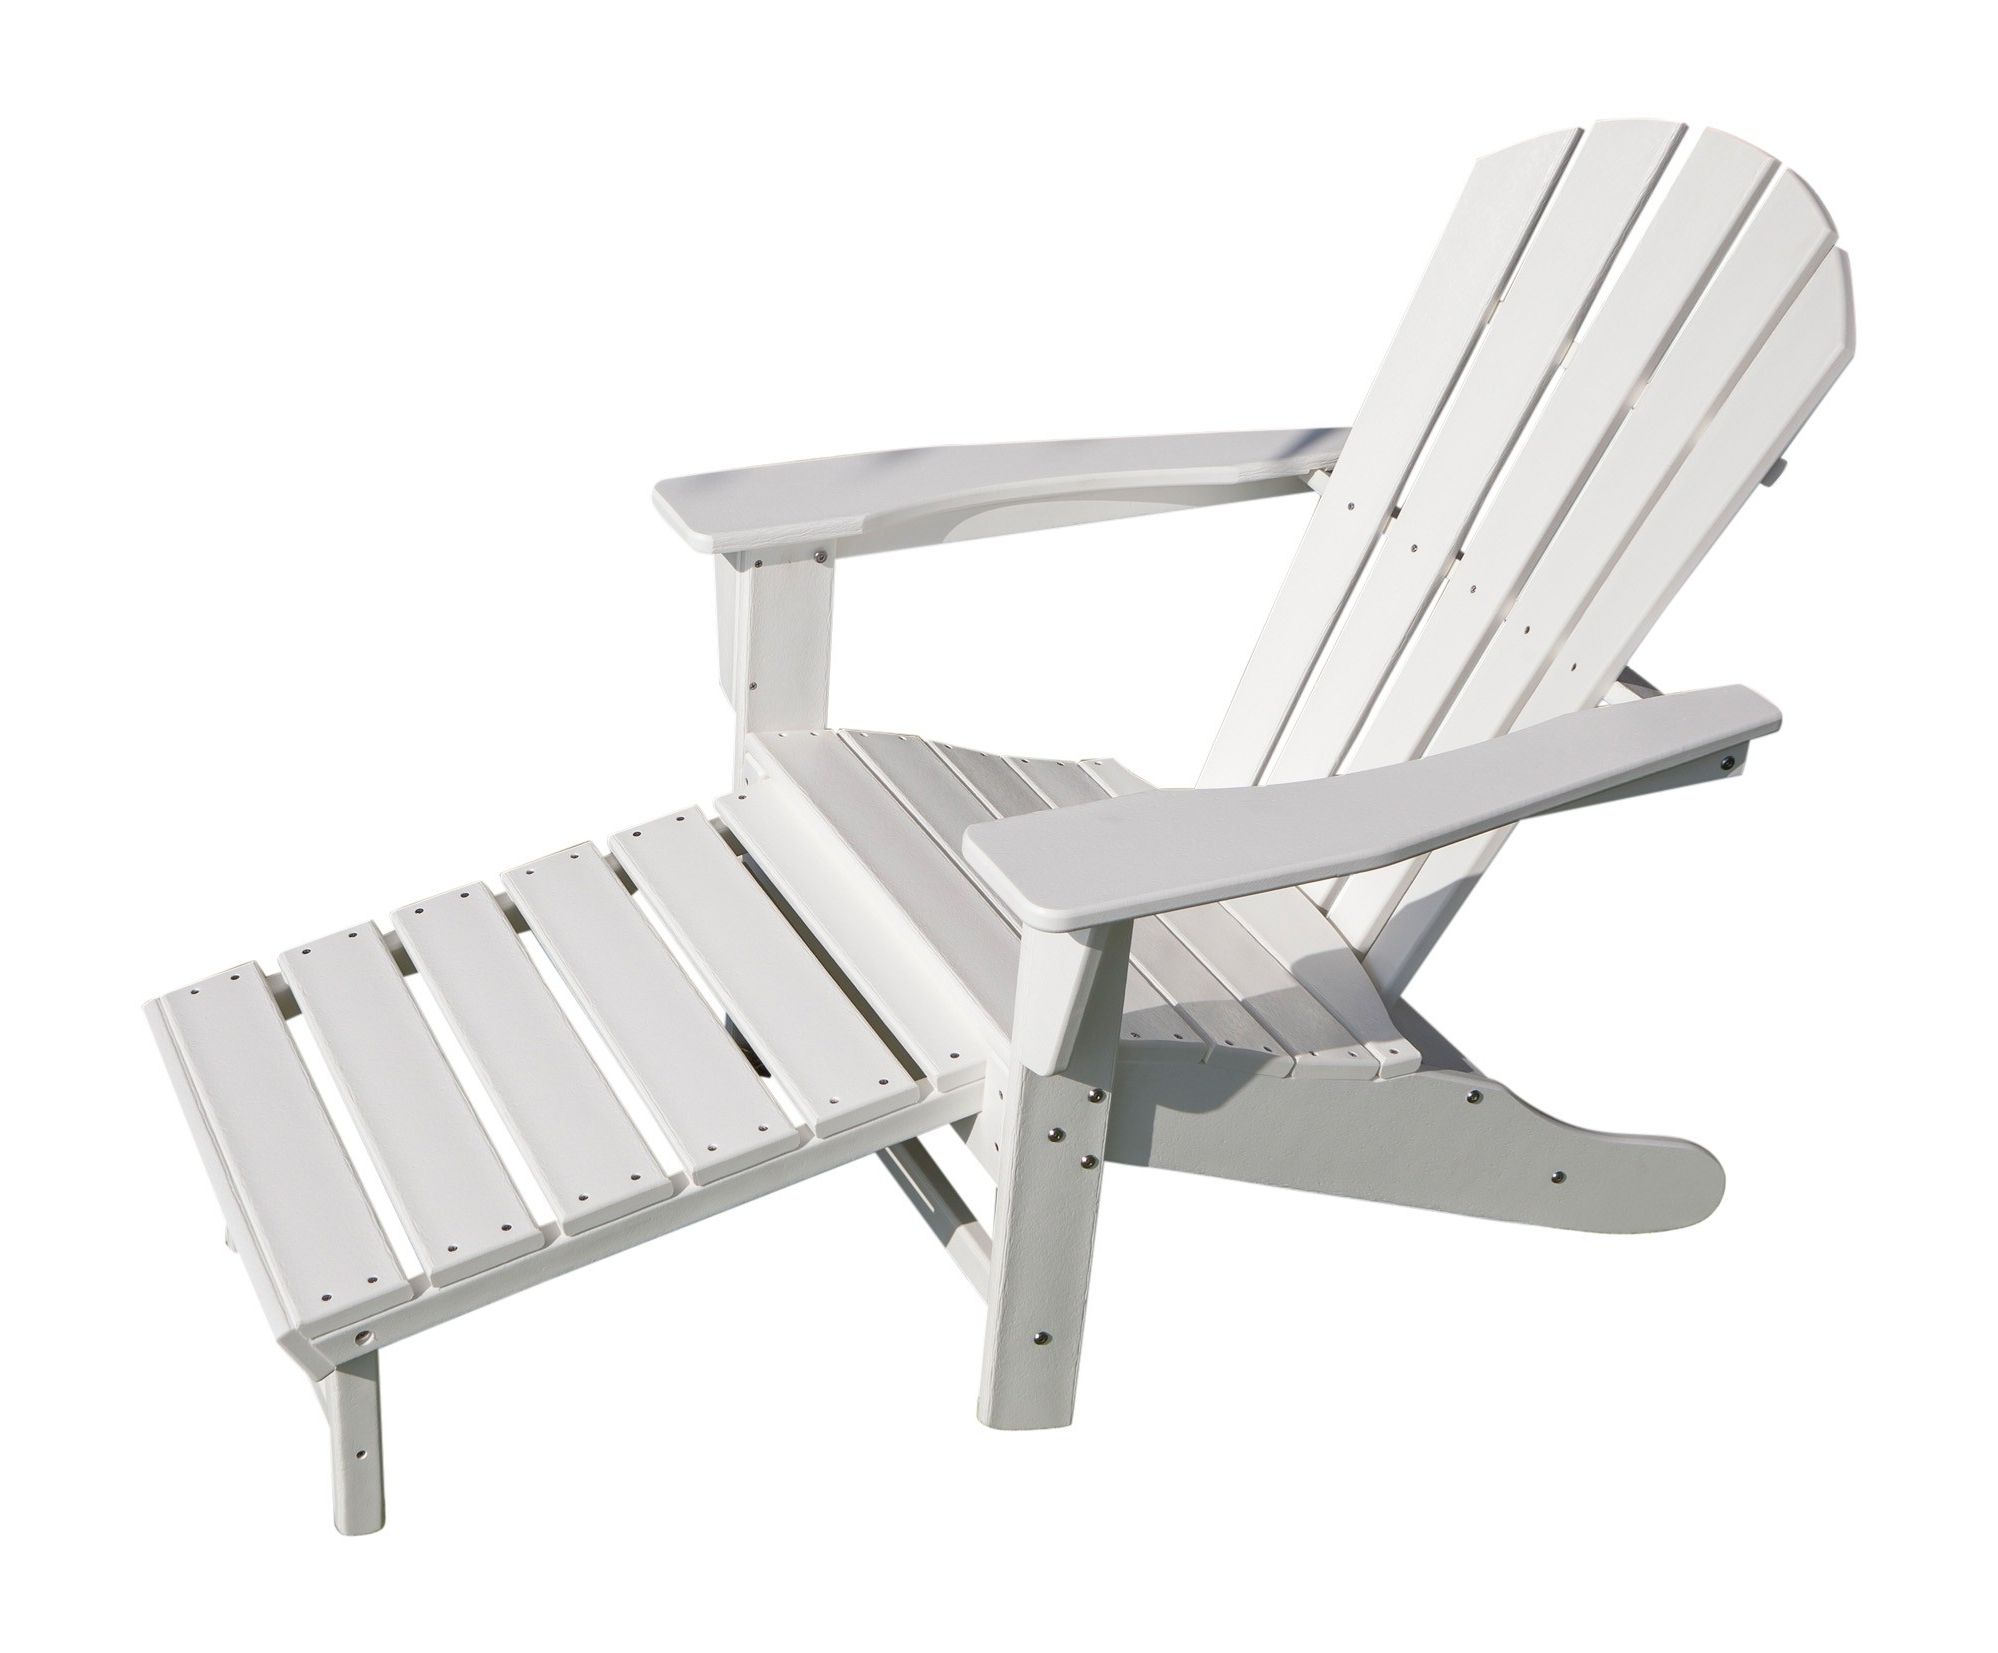 Widely Used Mahogany Adirondack Chairs With Ottoman With Regard To Polywood Palm Coast Ultimate Adirondack Chair W/ Pullout Ottoman (View 18 of 25)